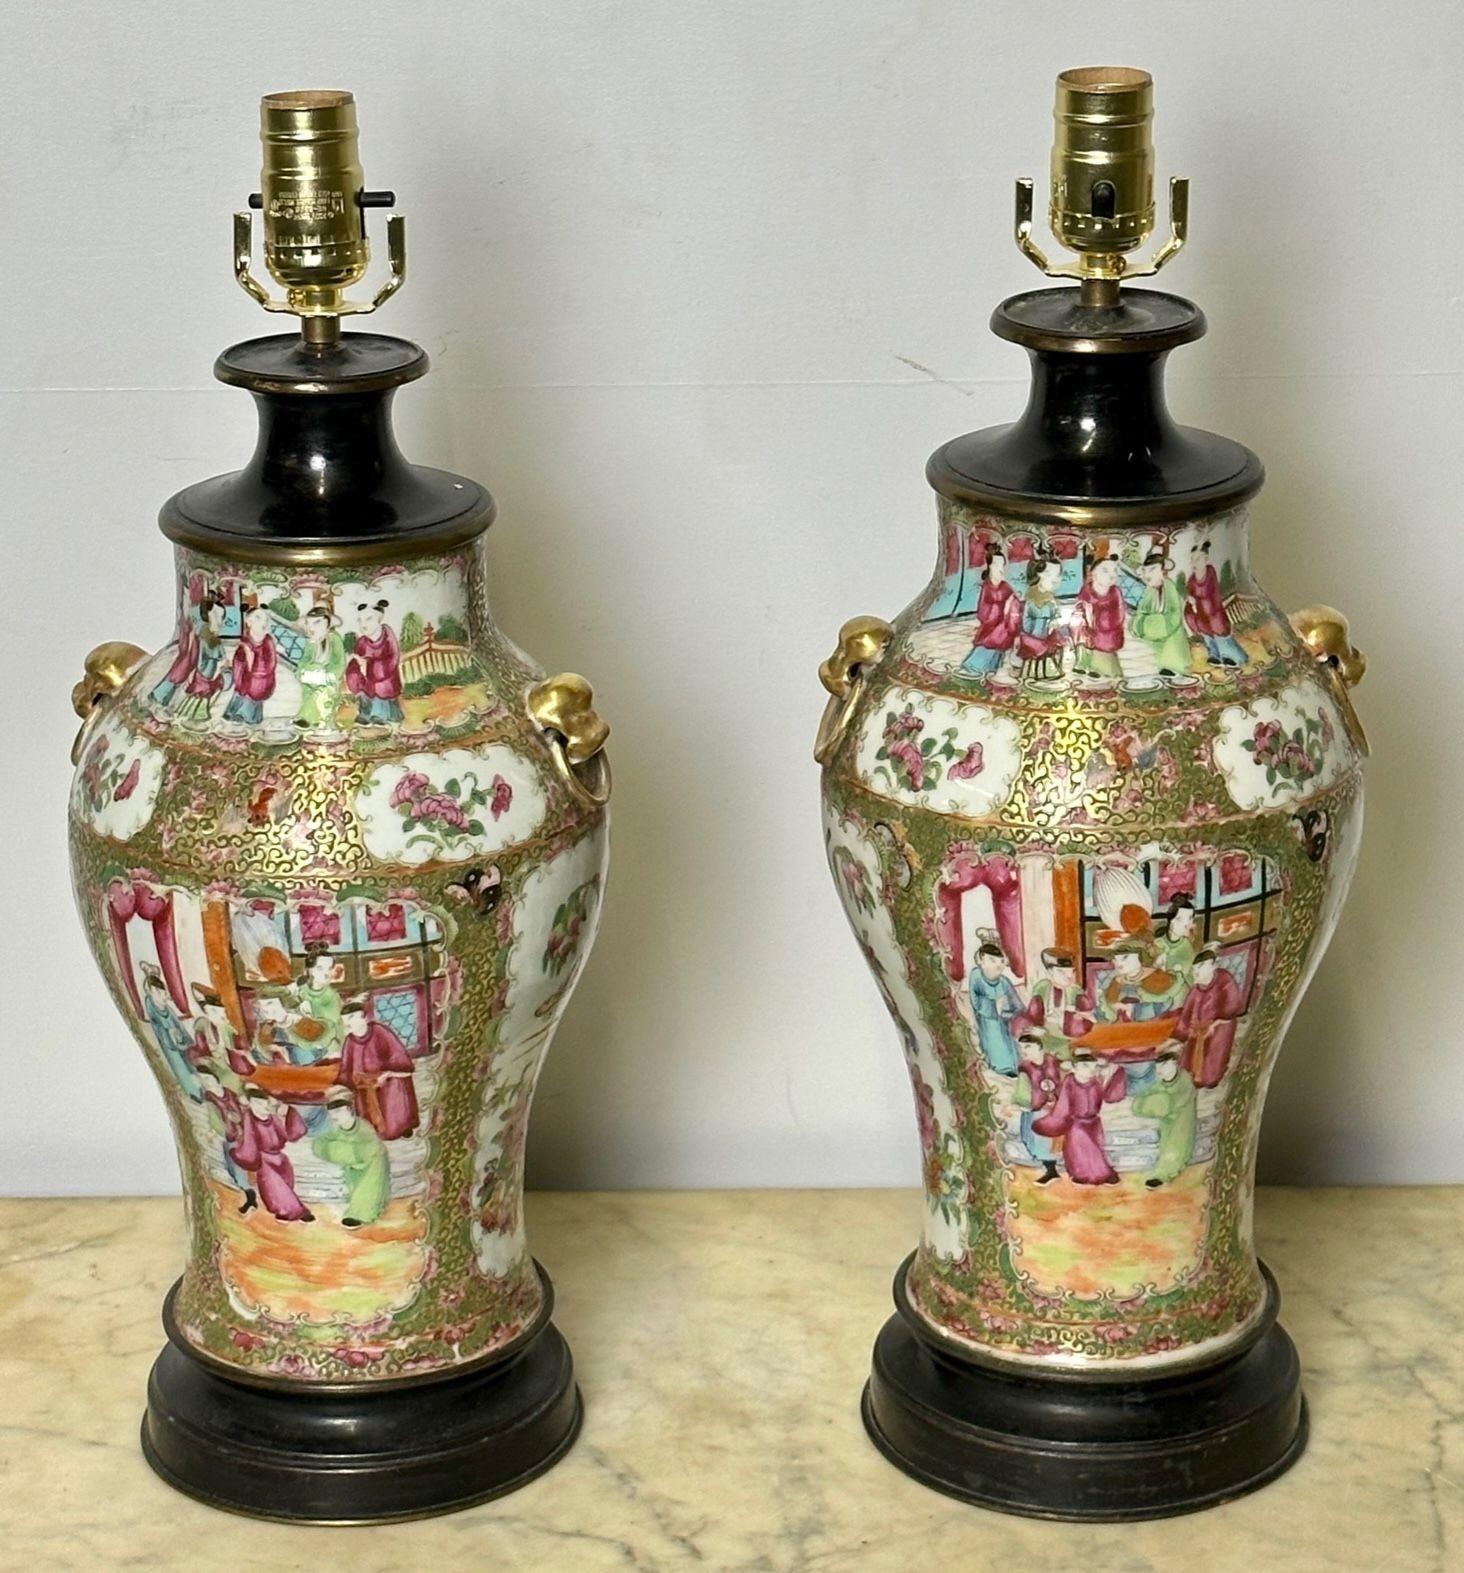 Pair of Ceramic Oriental Table Lamps, Decoration, Bronze, 19th C.
A fine pair of porcelain vase style table lamps depicting gathered figures in addition to floral and animal motifs.  Each is further ornamented with a pair of foo dog handles and a